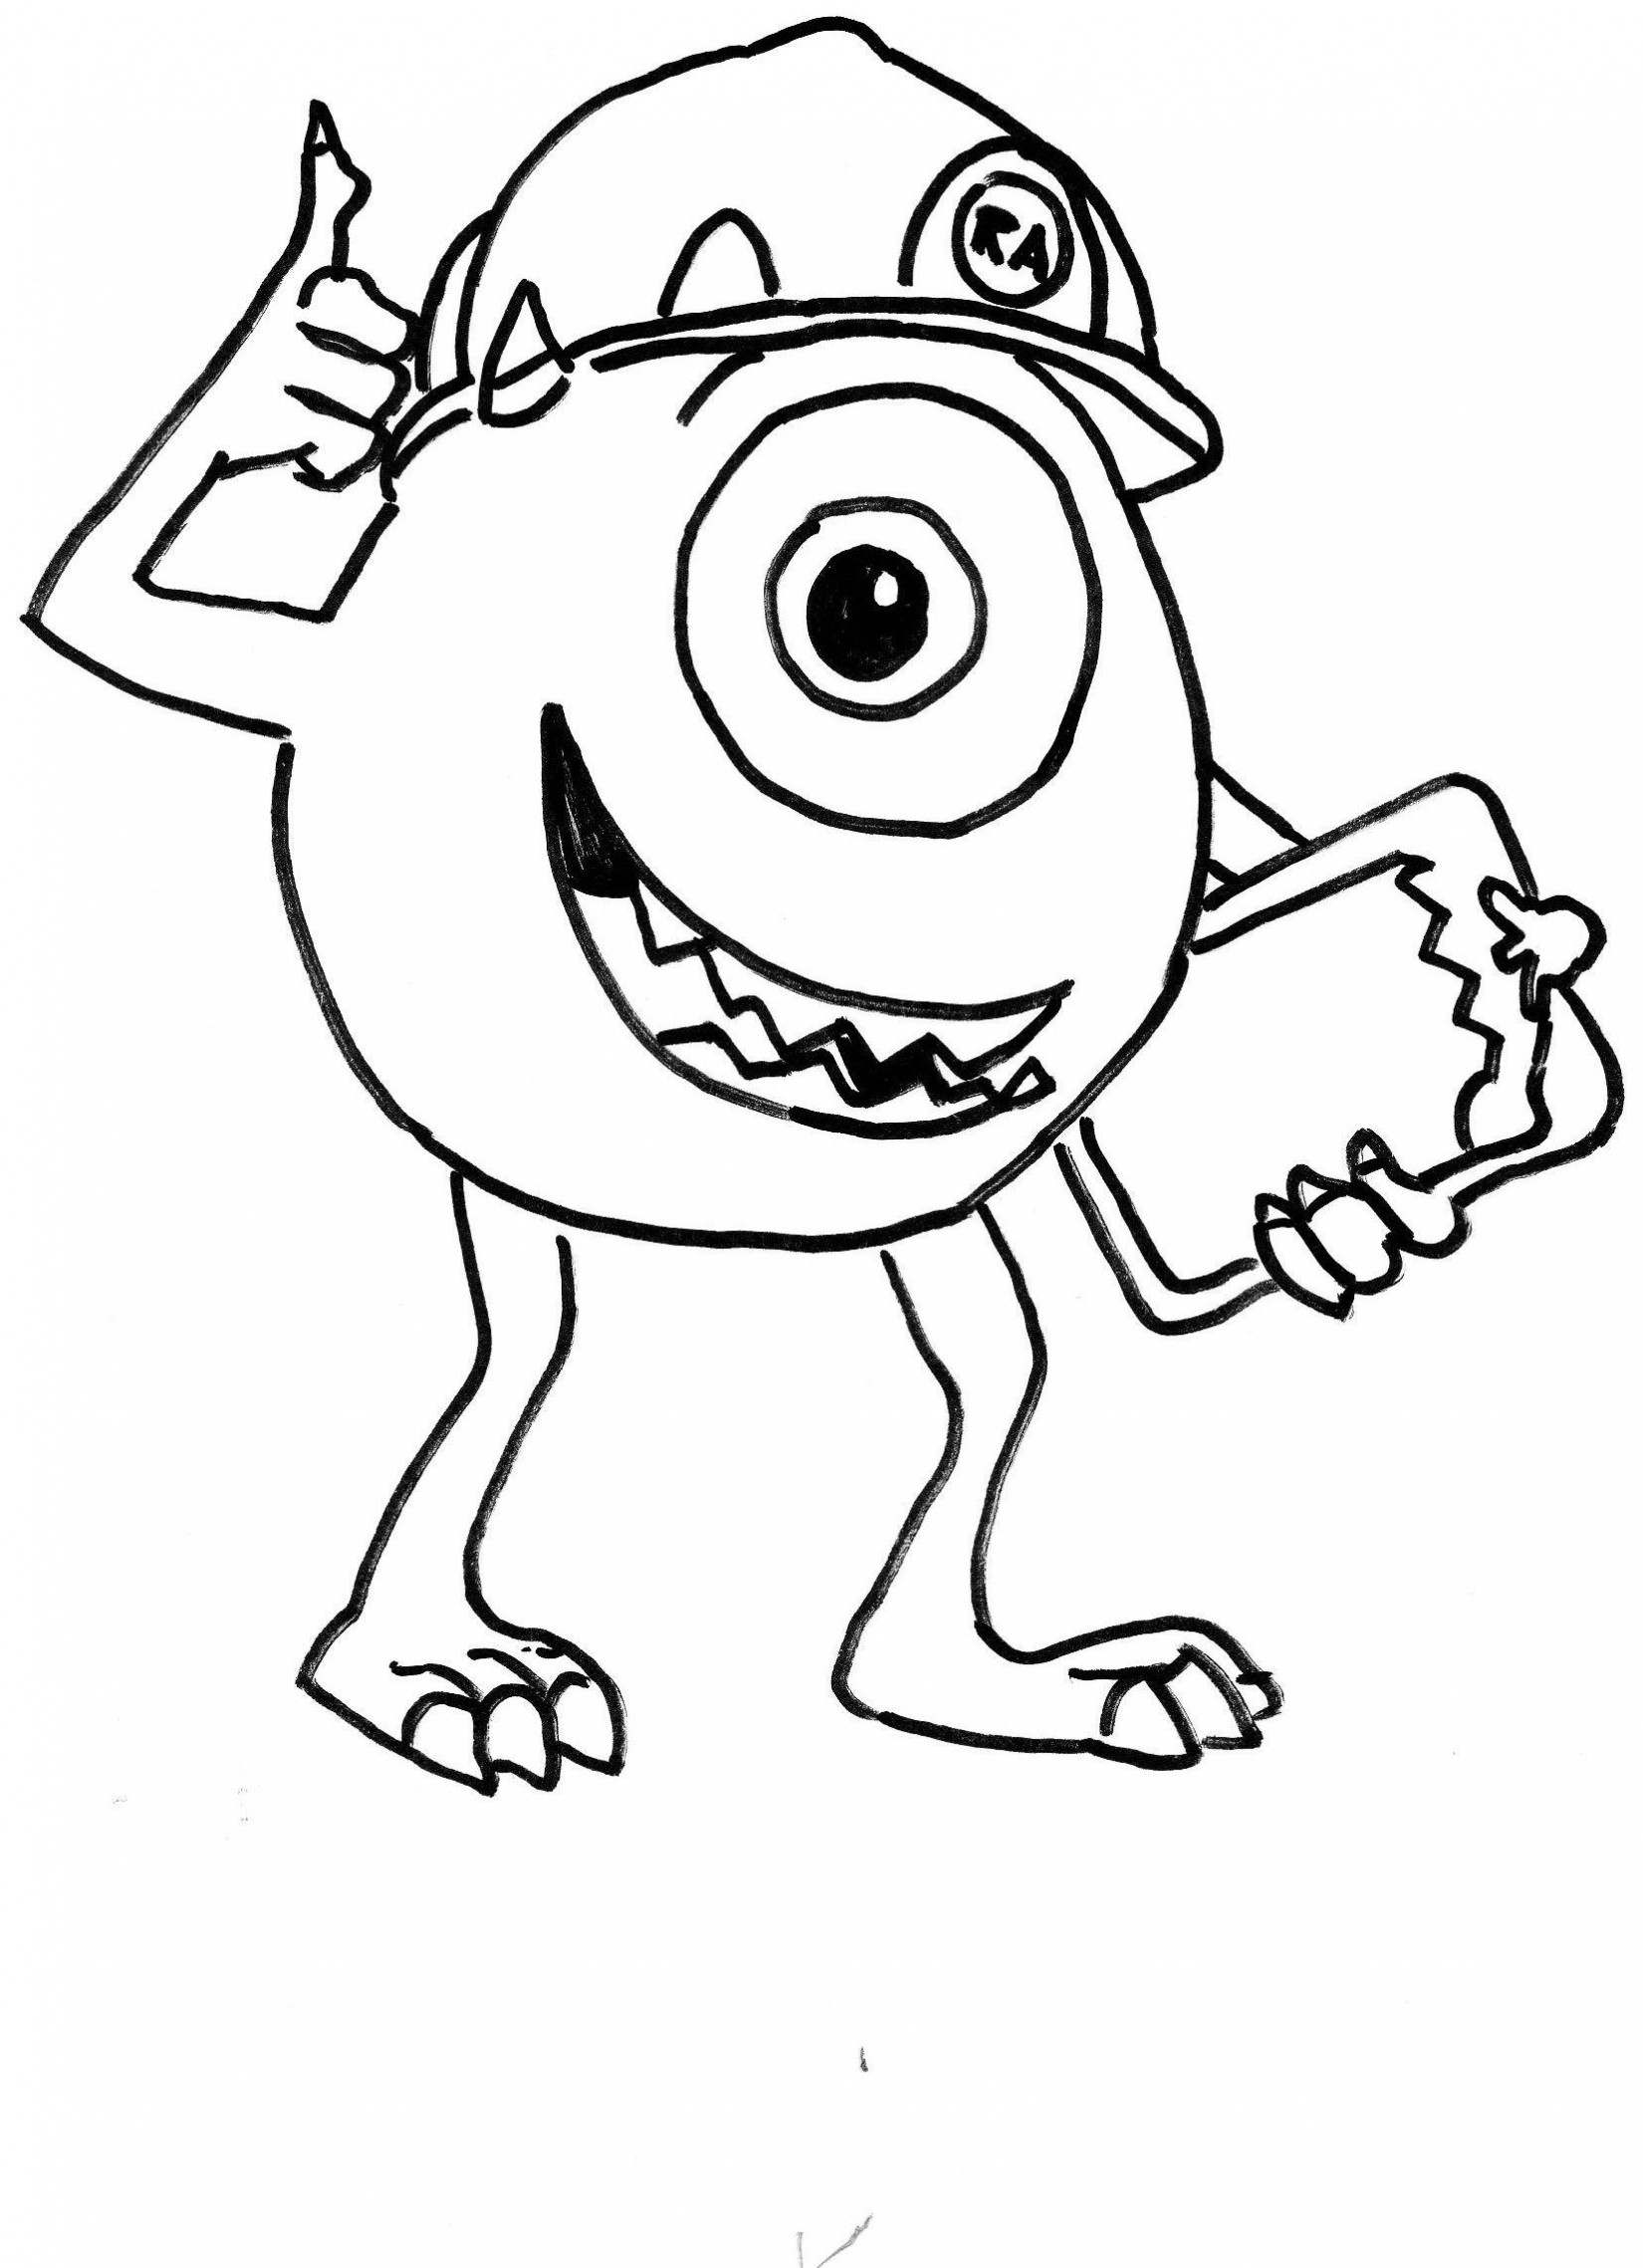 Cartoon coloring pages to download and print for free